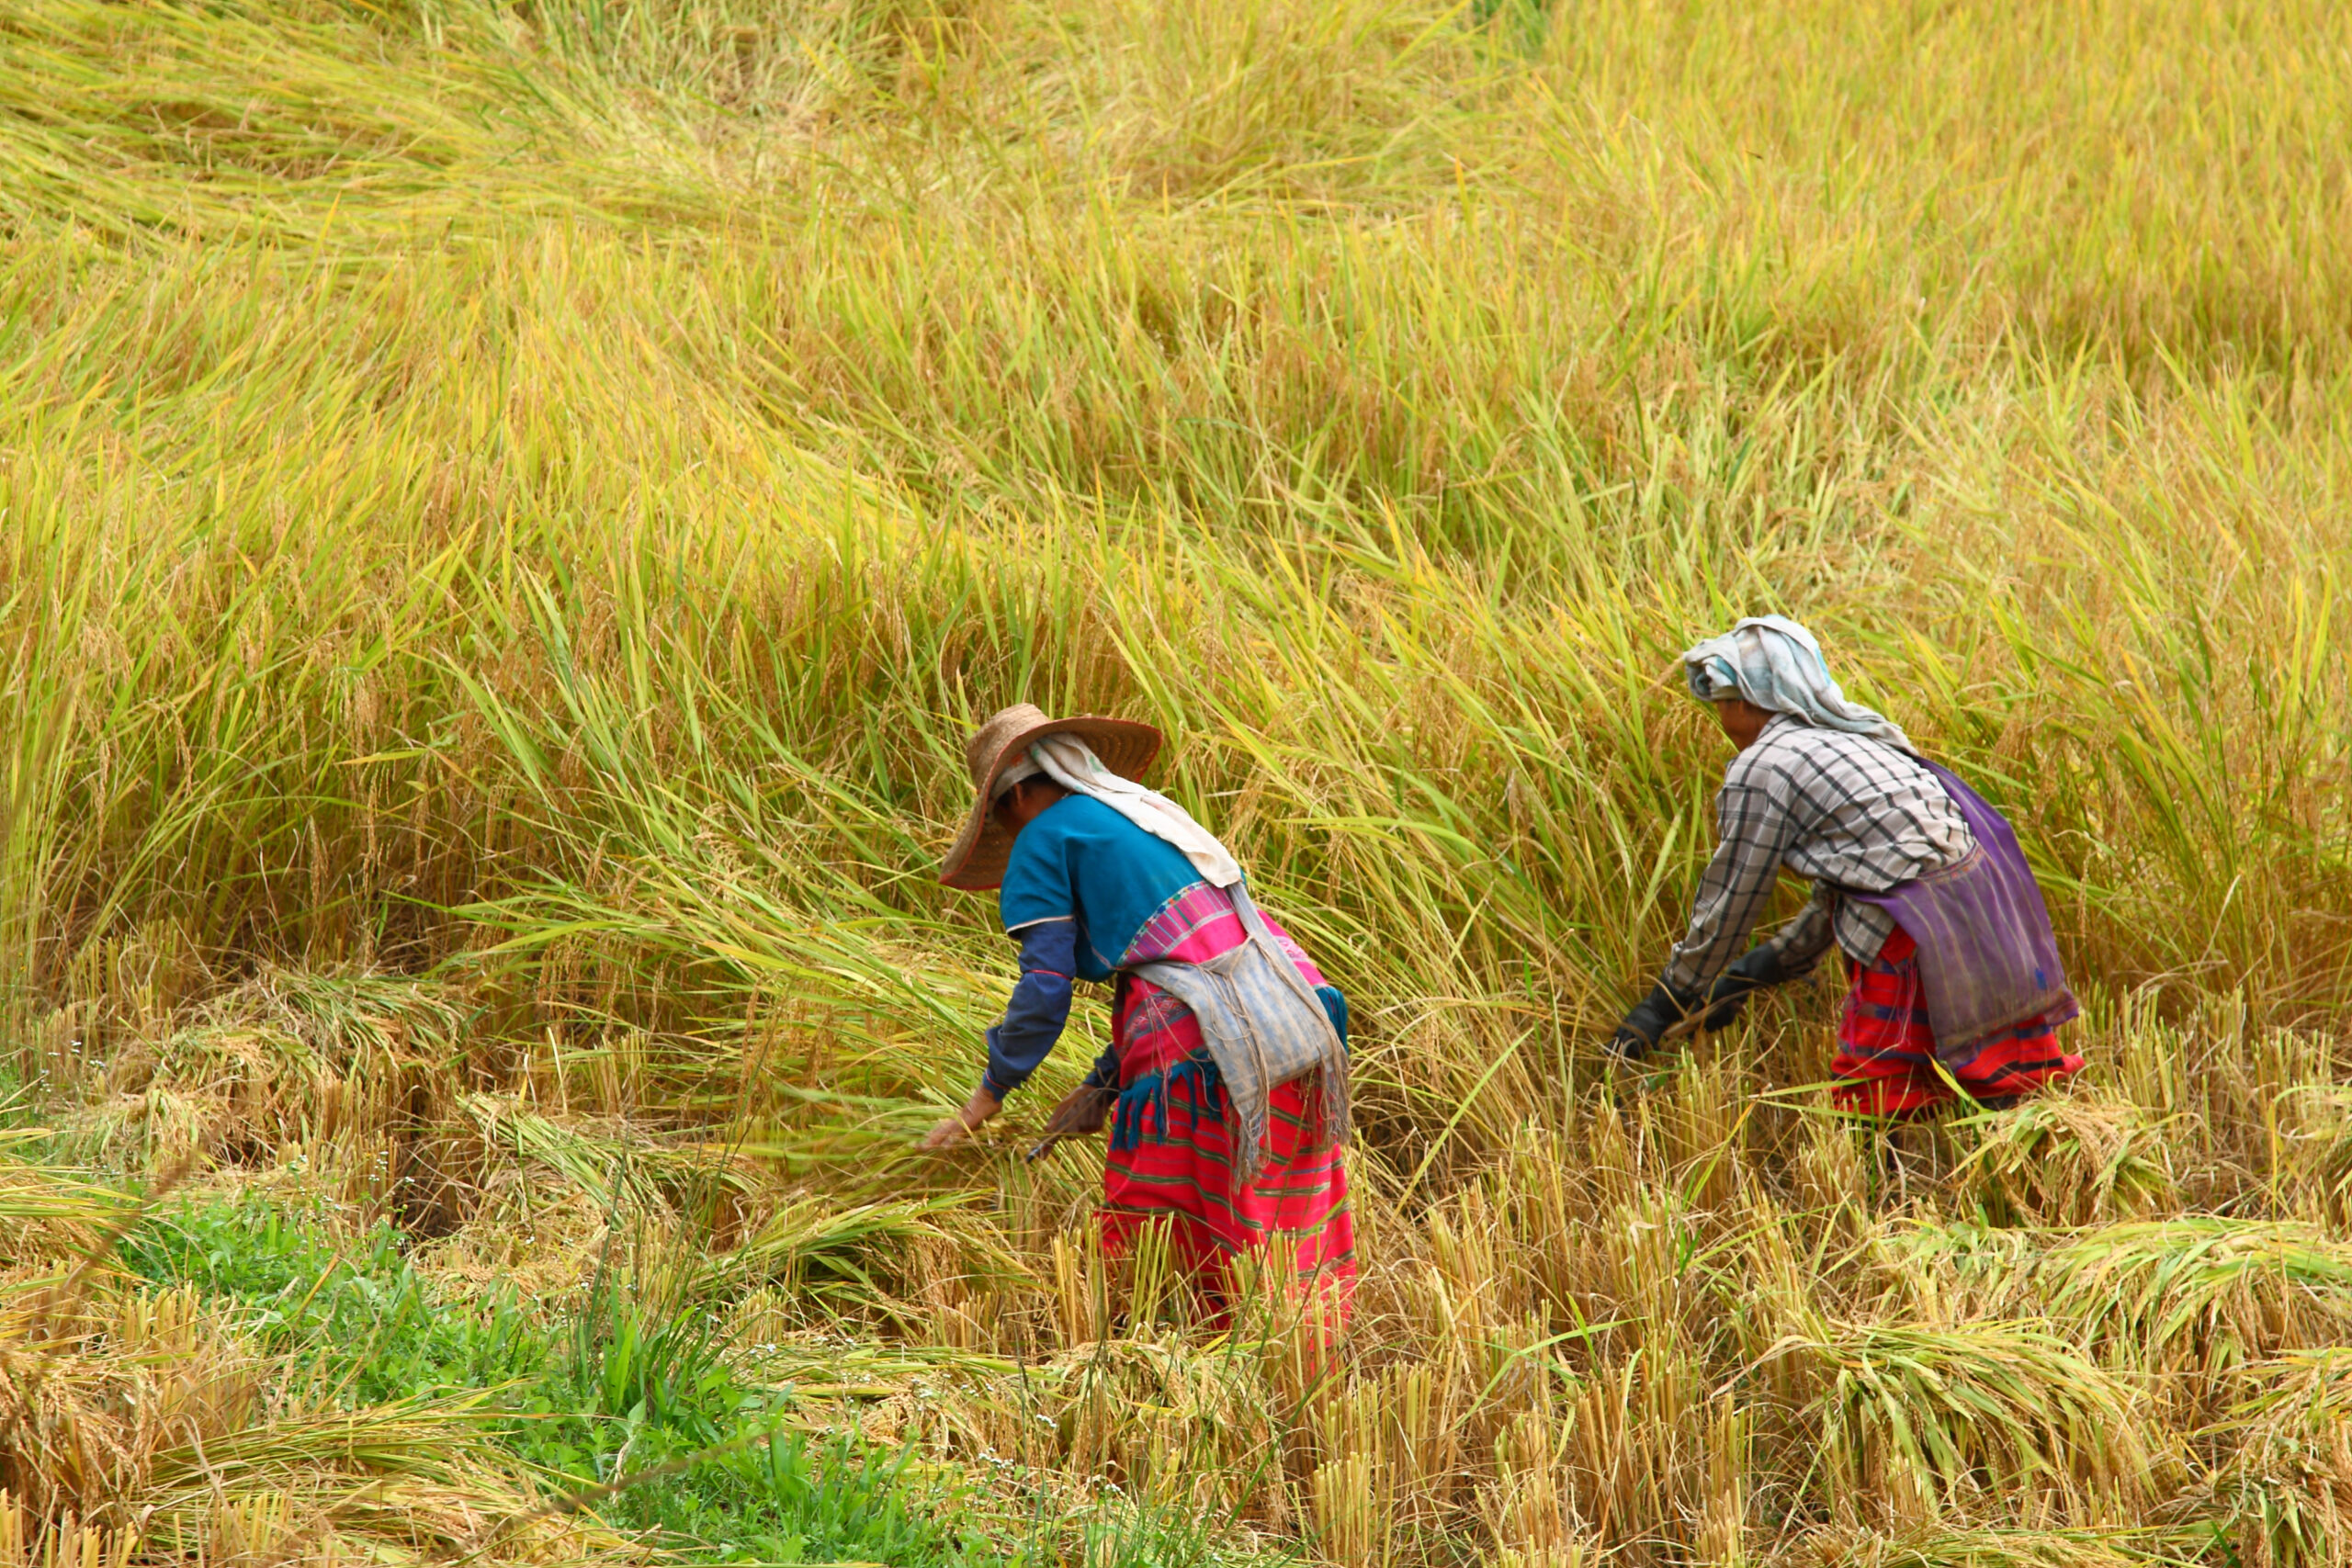 the pgazkoenyau hilltribes are helping harvest the rice in the paddy field